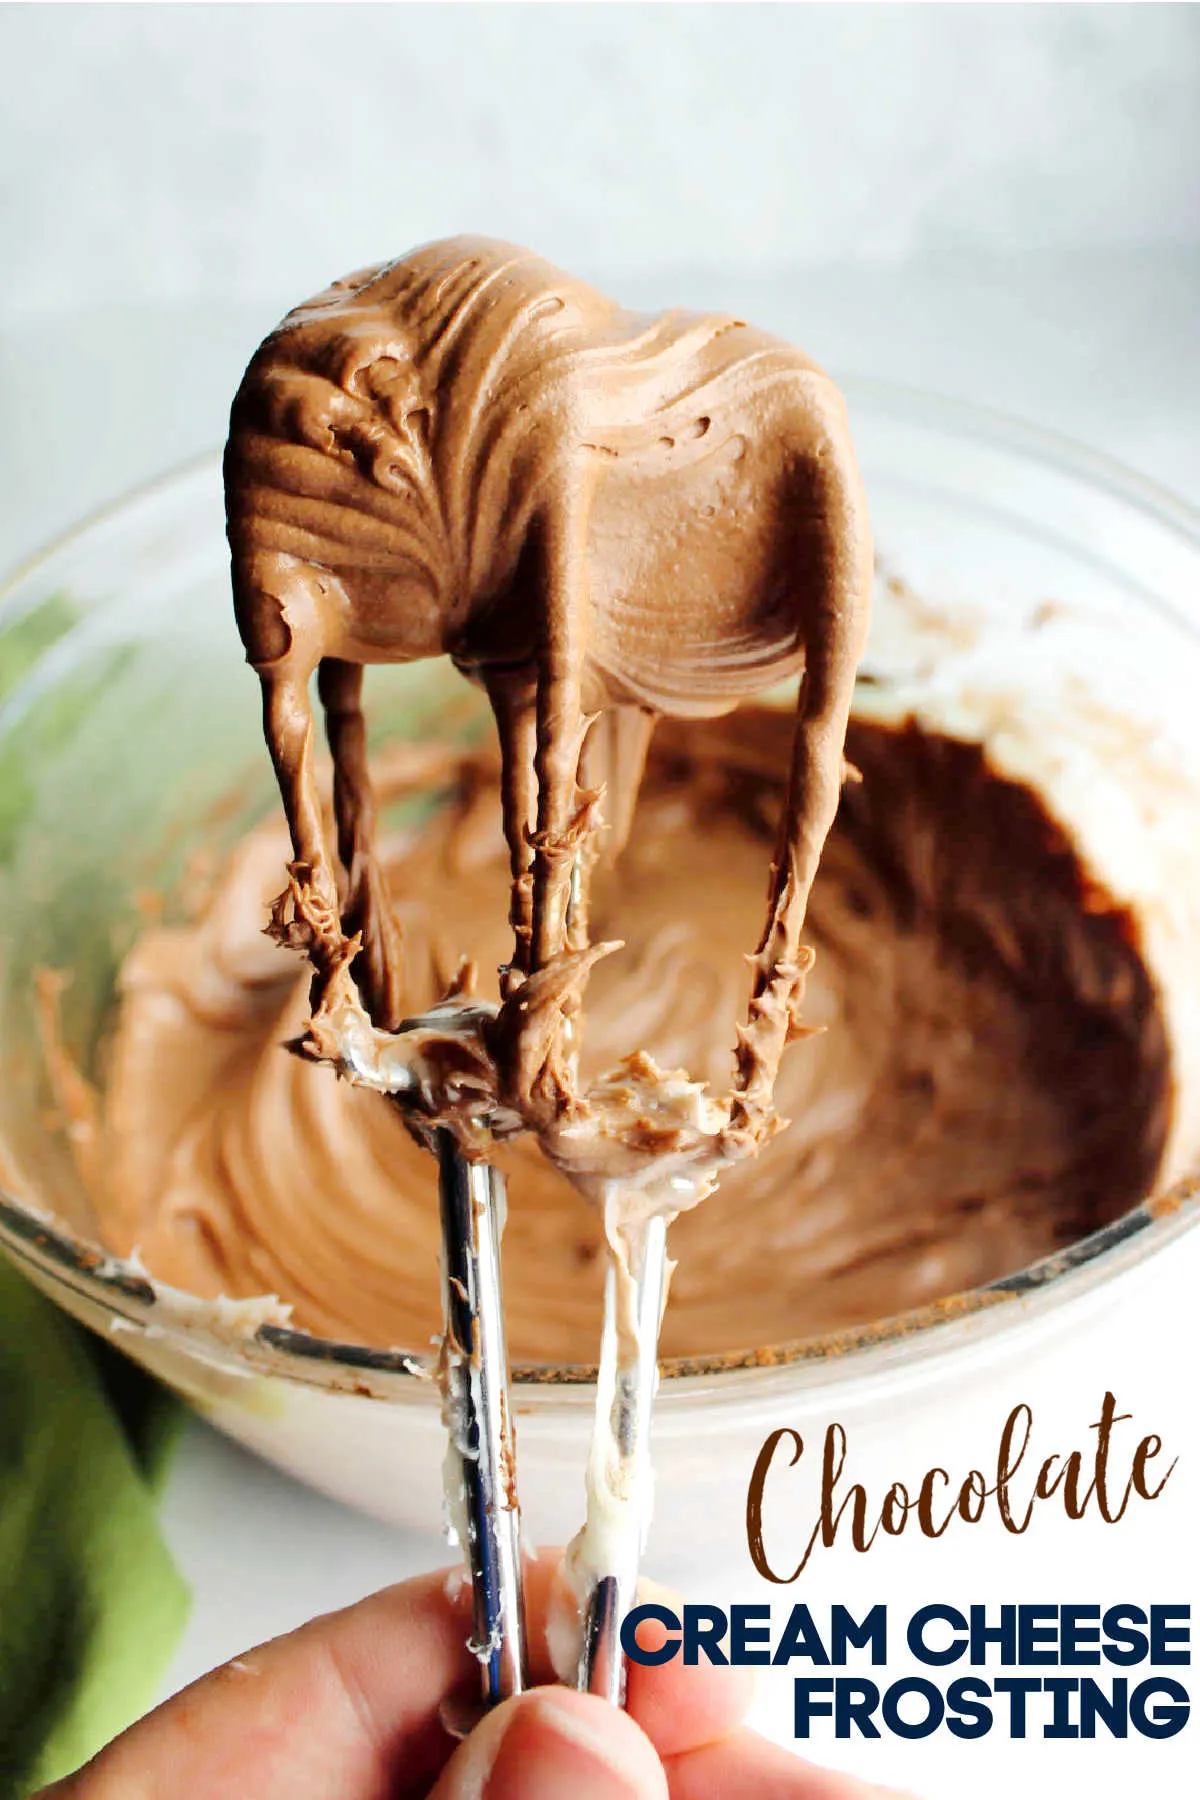 This creamy chocolate cream cheese frosting is made from simple ingredients but has big flavor. It is the perfect topping for everything from a classic yellow cake to a rich chocolate cake. It has the perfect amount of cream cheese tang and chocolate. If your sweet tooth is acting up, you may be tempted to eat it straight from the mixing bowl!